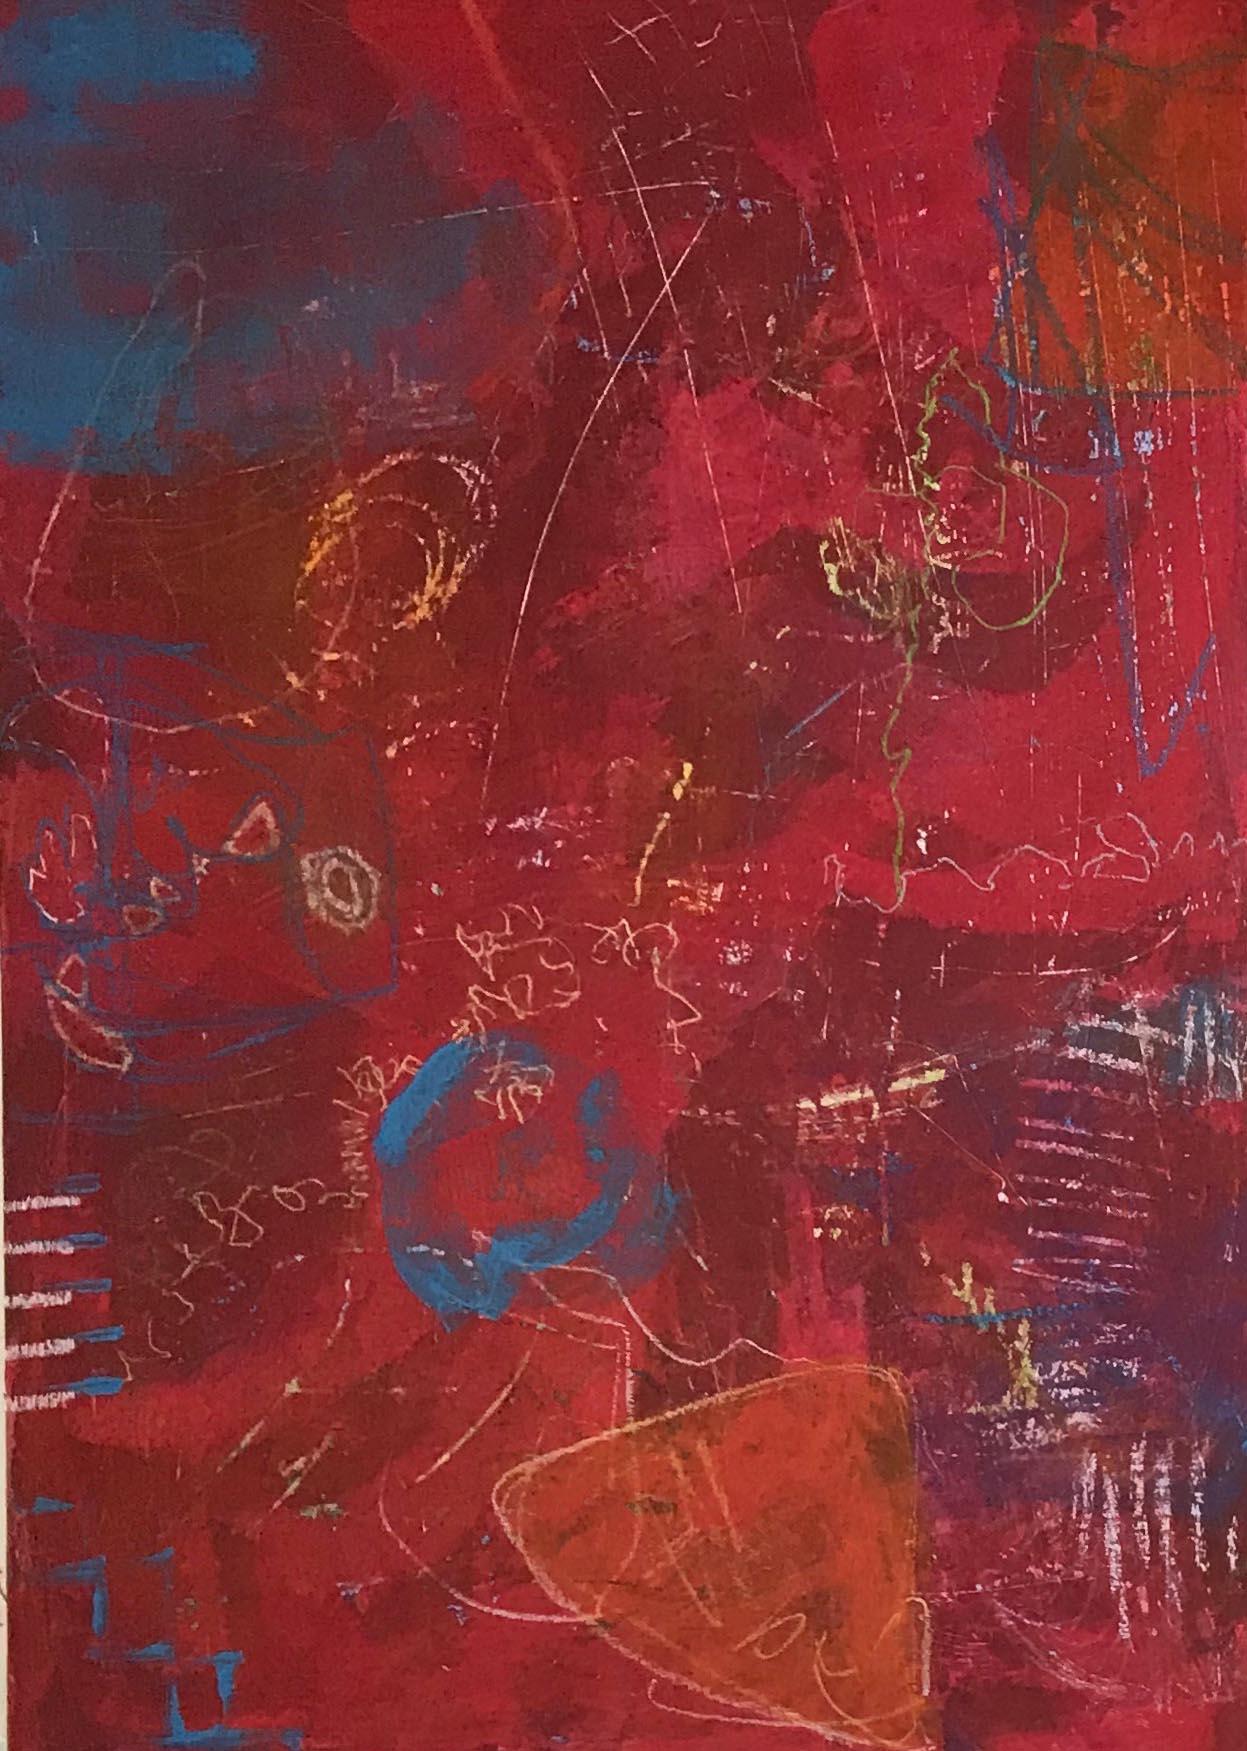 Red Painting, Abstract Expressionism, Mixed Media, Original Art - Abstract Expressionist Mixed Media Art by Dora Williams